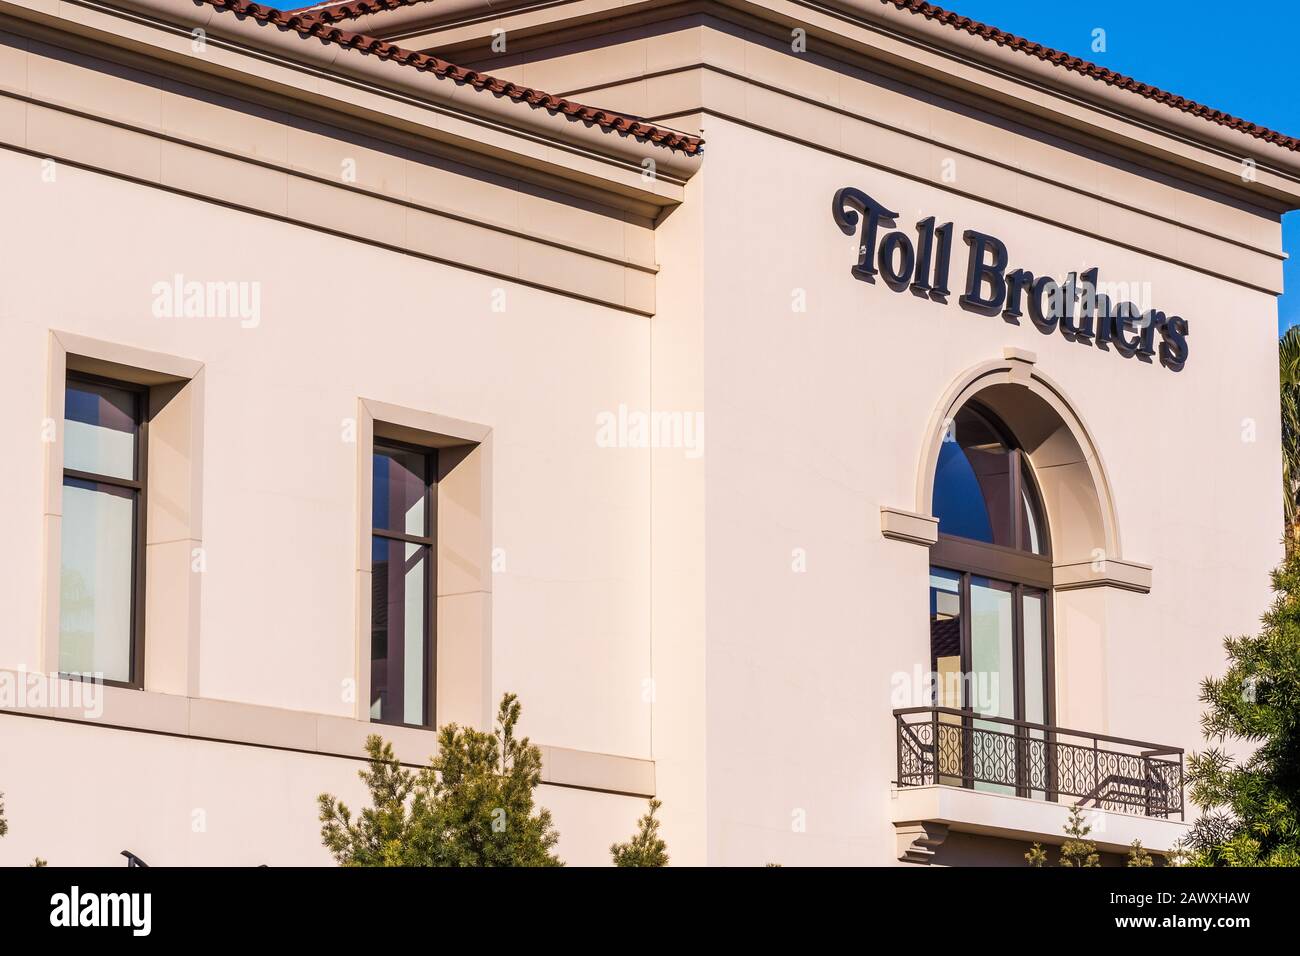 Feb 6, 2020 Santa Clara / CA / USA - Toll Brothers sale offices in Silicon Valley; Toll Brothers is a home construction company that specializes in bu Stock Photo